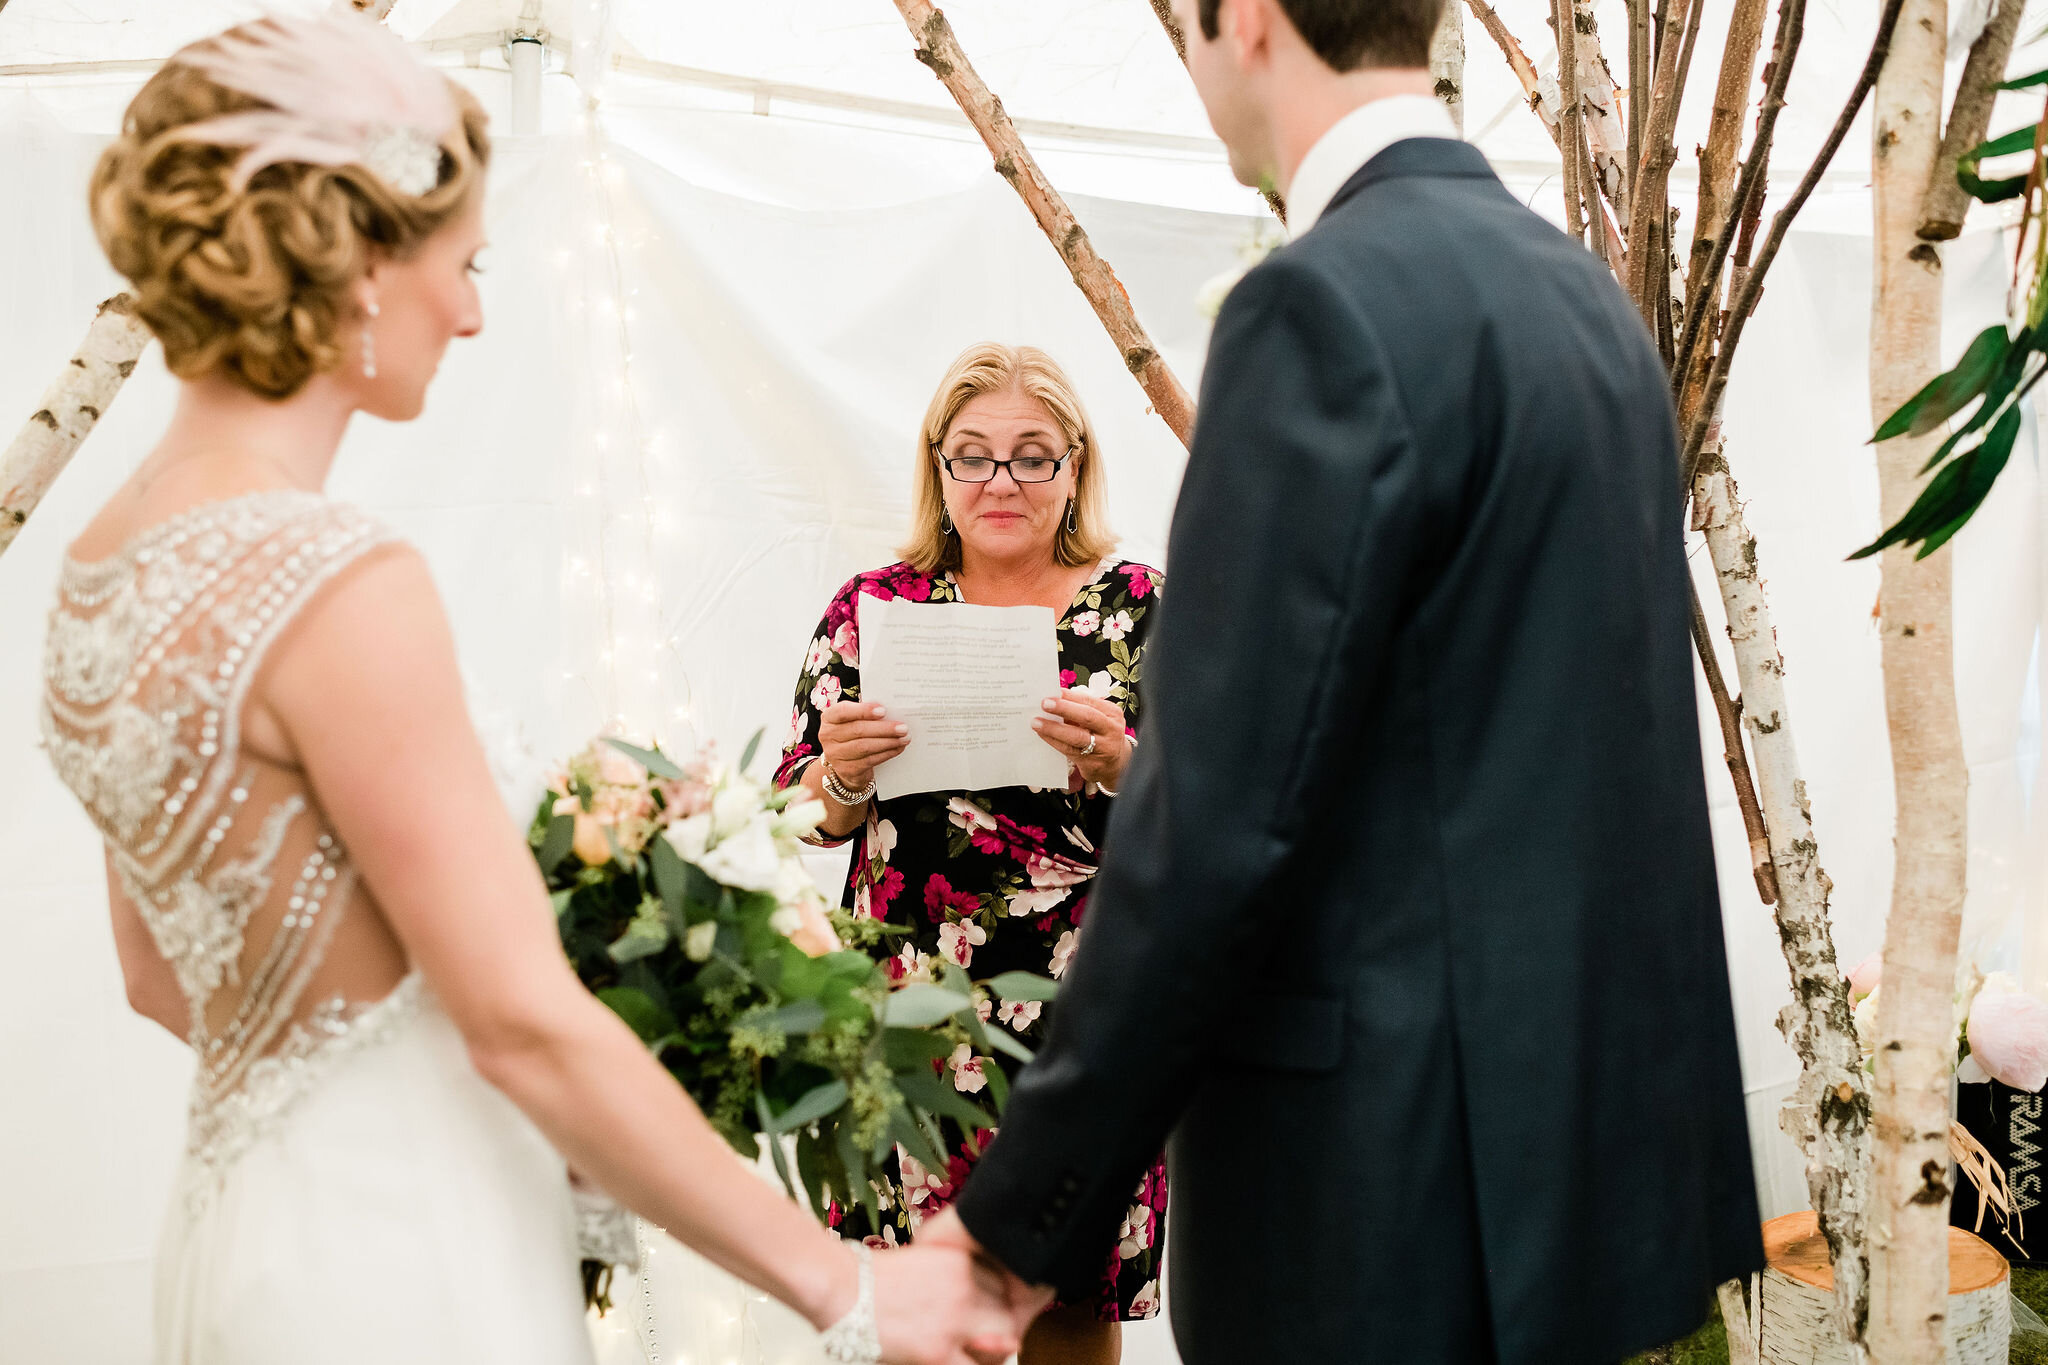 Bride and groom holding hands while wedding guest reads